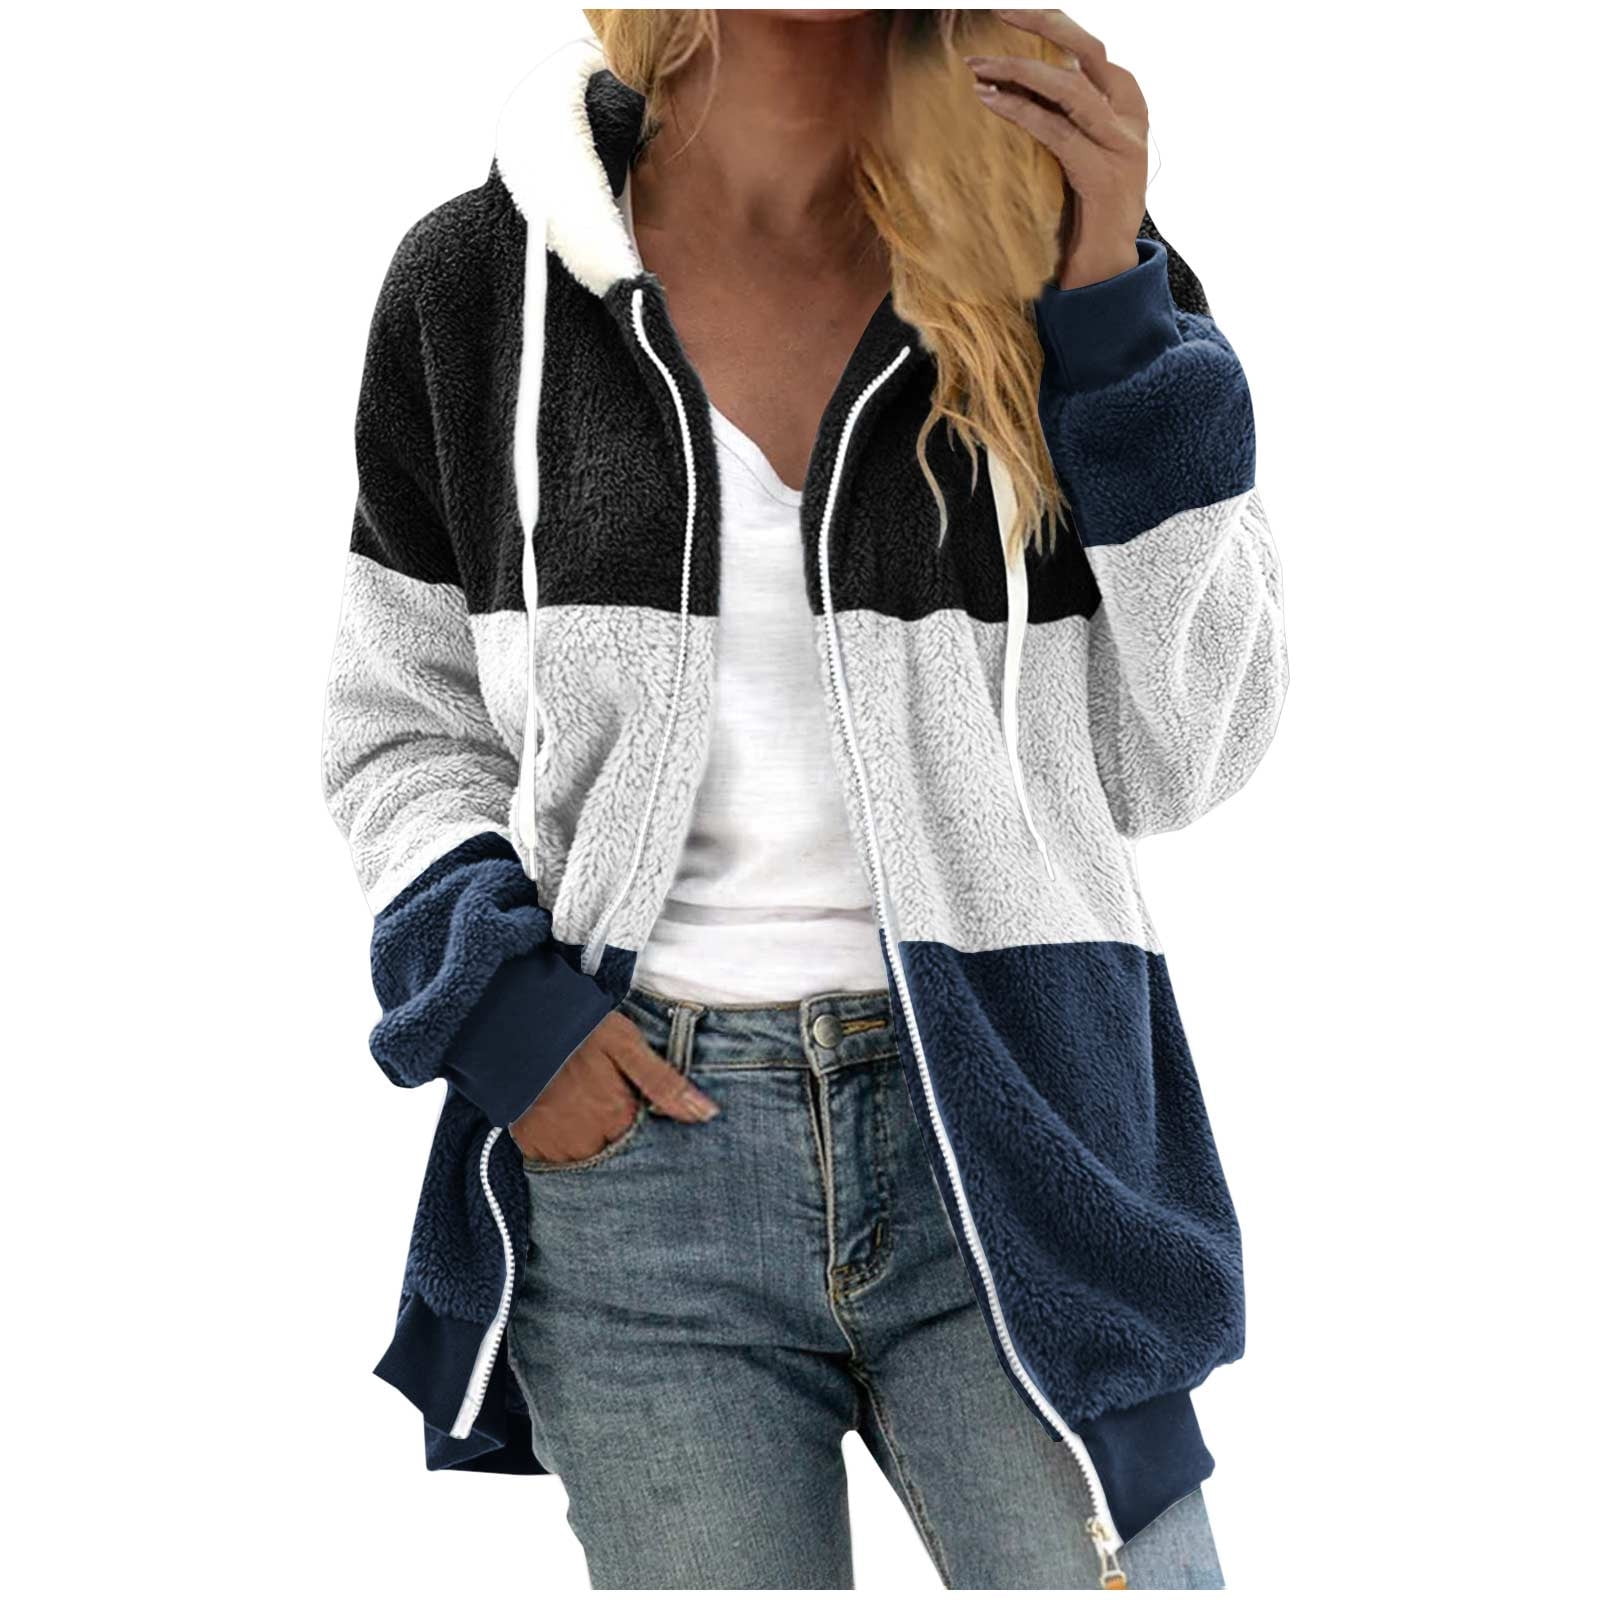  IHGFTRTH Womens Jacket Oversized Loose,invite only deal,1 cent  items,black+friday+deals,cheap gifts,deals under 20,clearance items under  20 dollars Free of Shipping : Clothing, Shoes & Jewelry